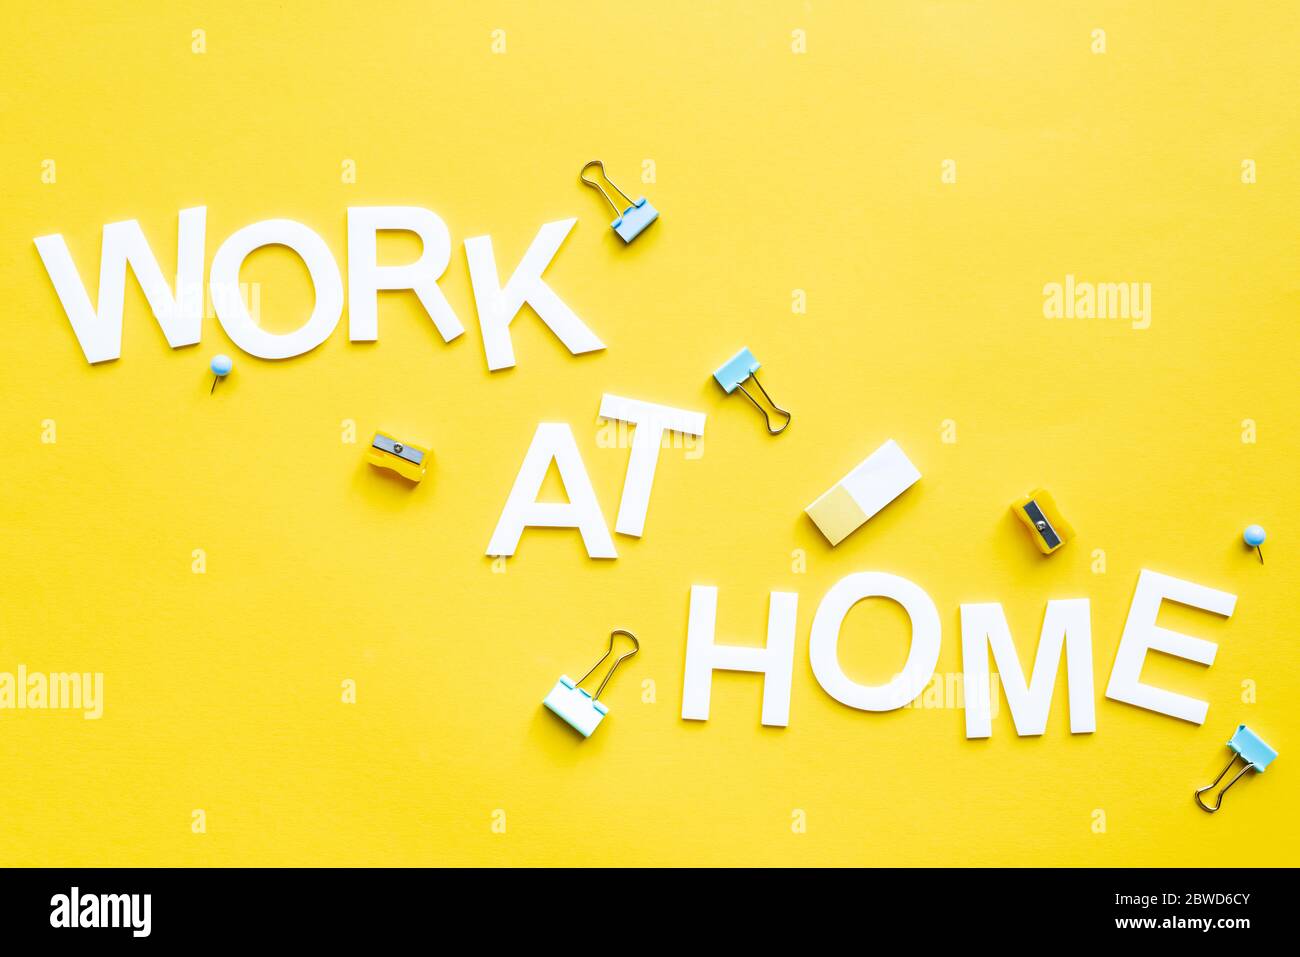 Top view of work at home lettering with pencil sharpeners, binder clips and eraser on yellow surface Stock Photo